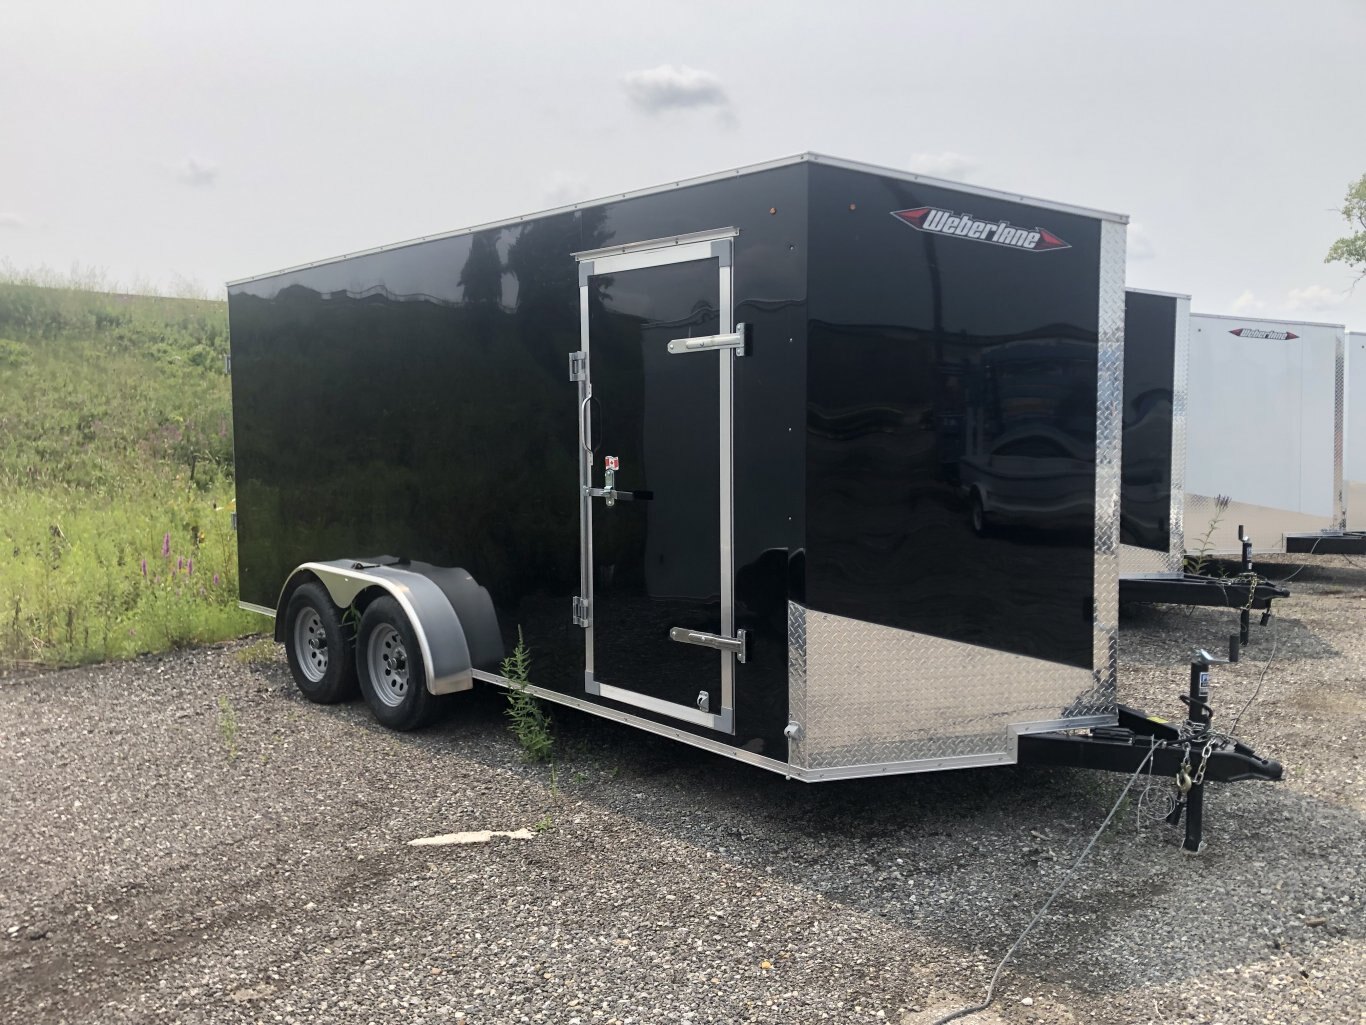 2023 Weberlane Tandem Axle Enclosed Trailers - W716ECTW